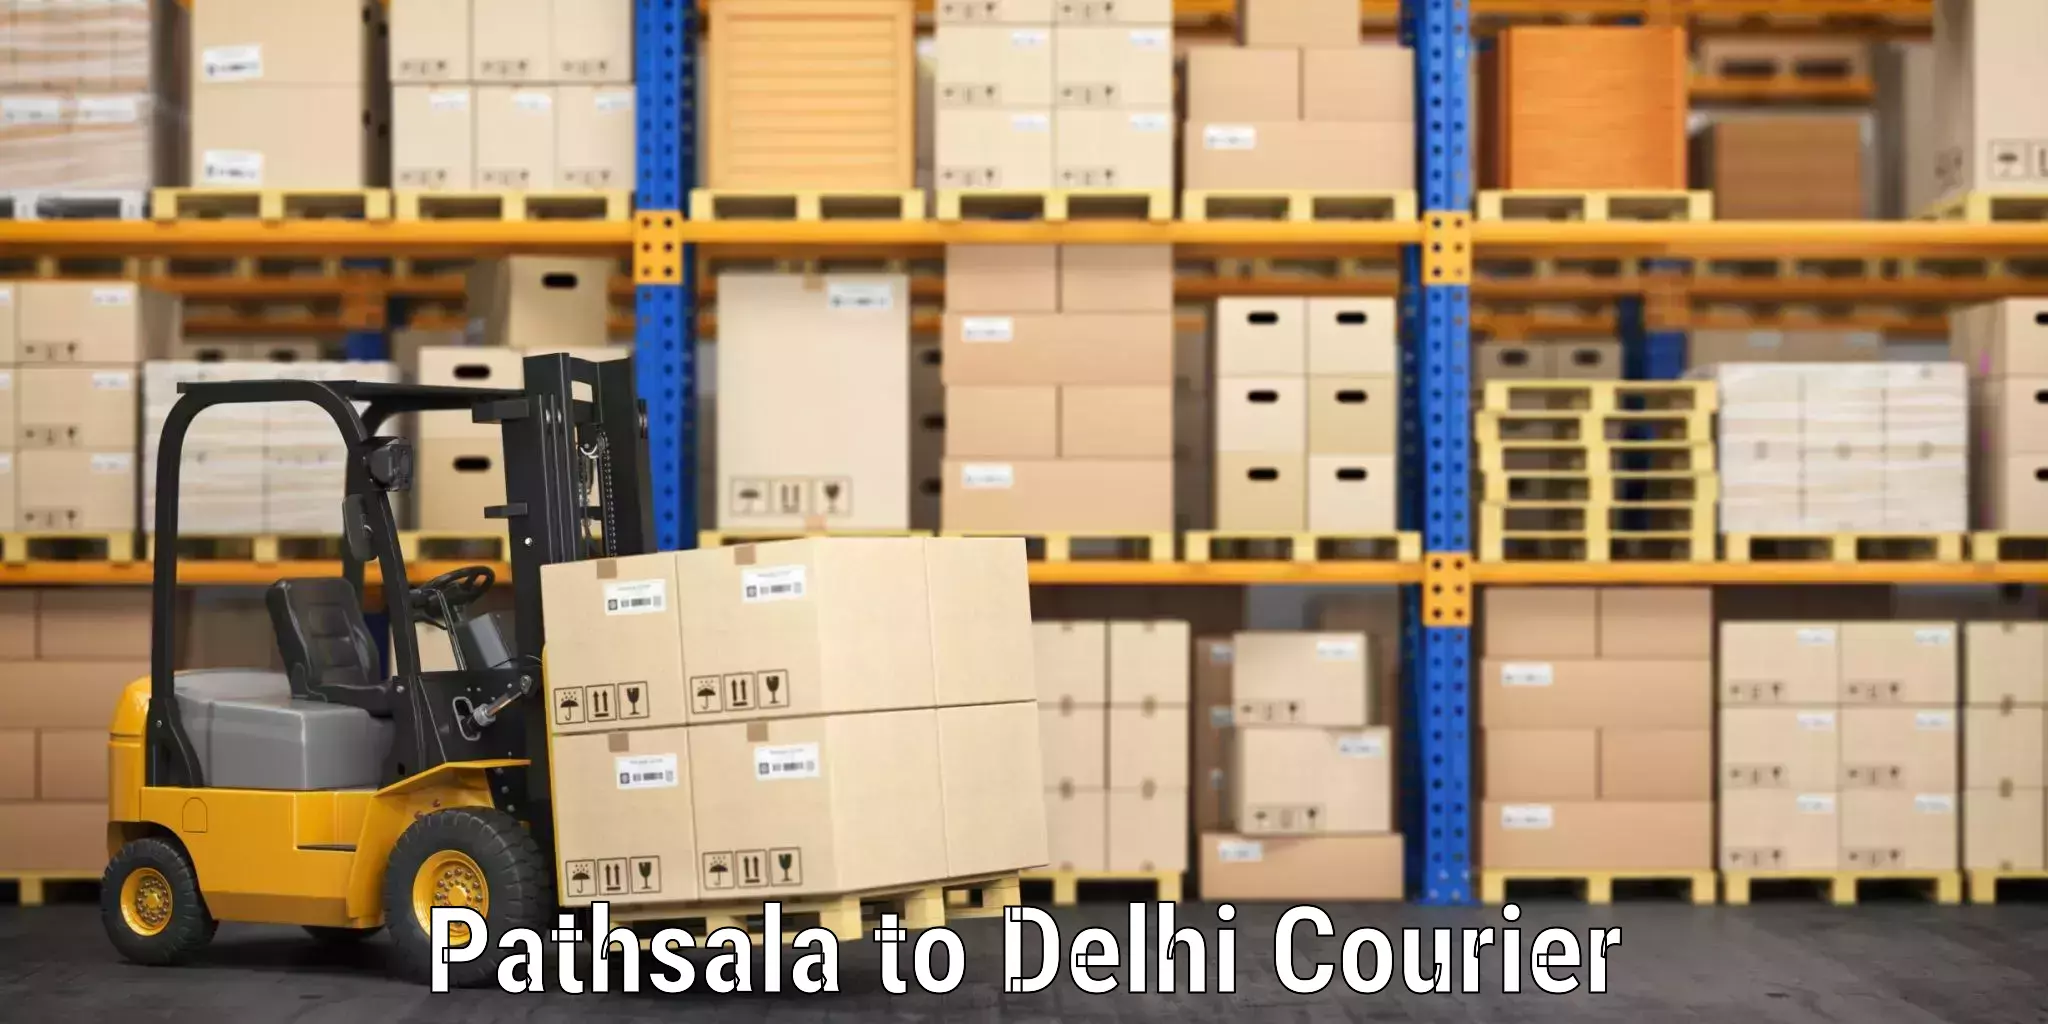 Luggage storage and delivery in Pathsala to Delhi